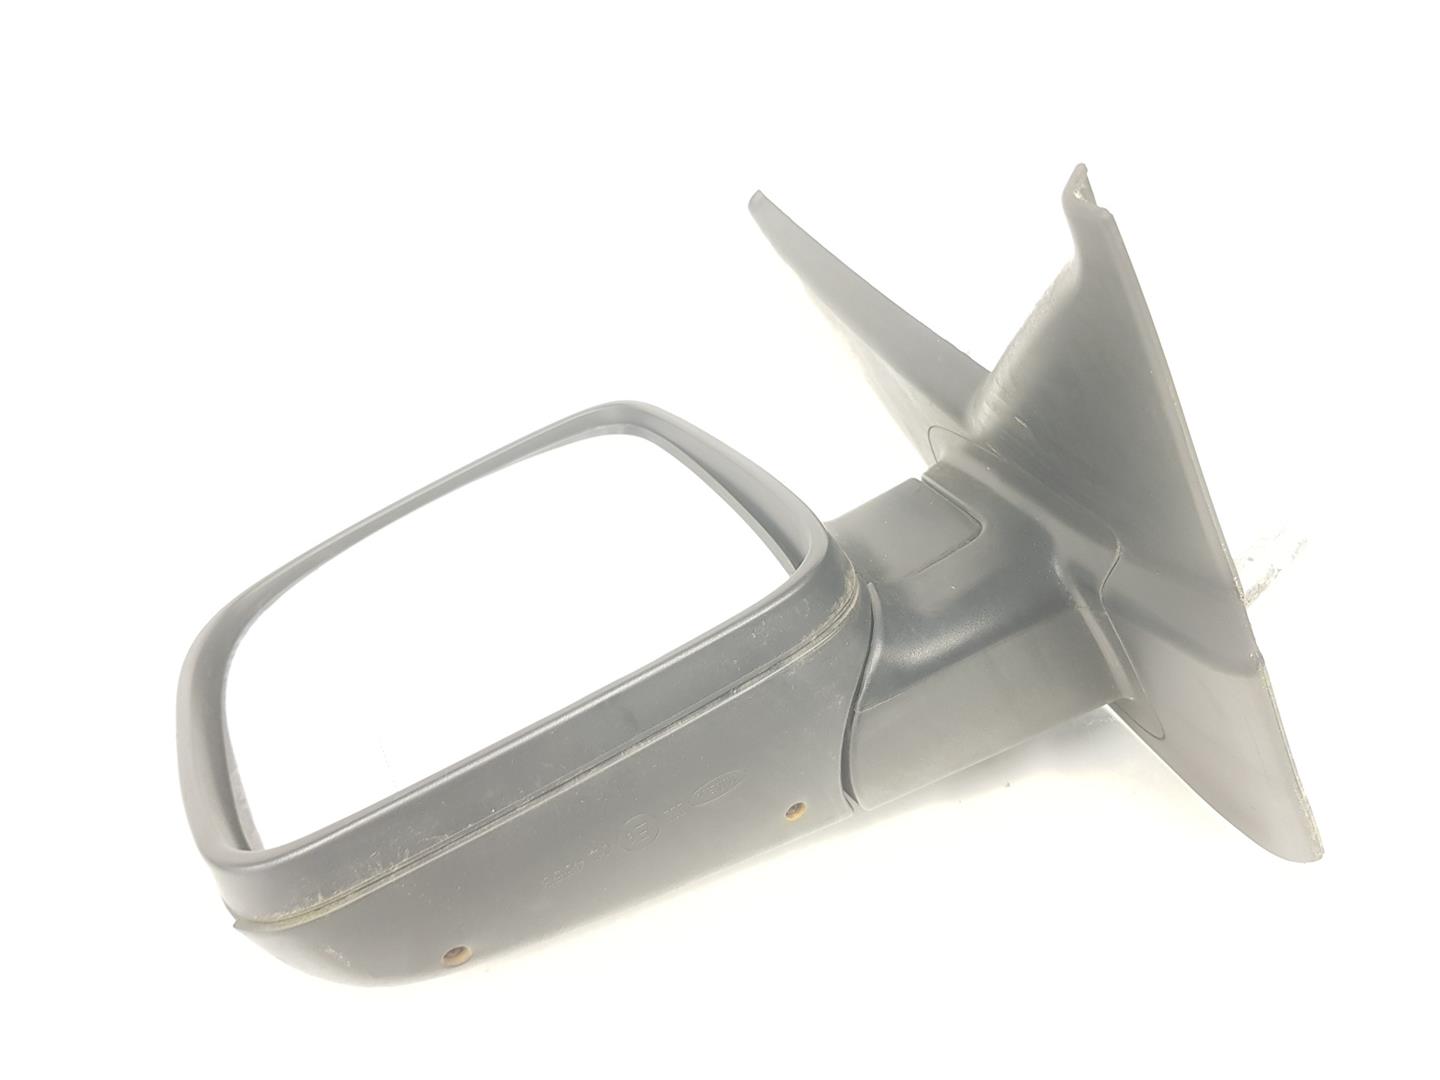 VOLKSWAGEN Transporter T5 (2003-2015) Left Side Wing Mirror 7H1857507A, 7H1857507A 24240328